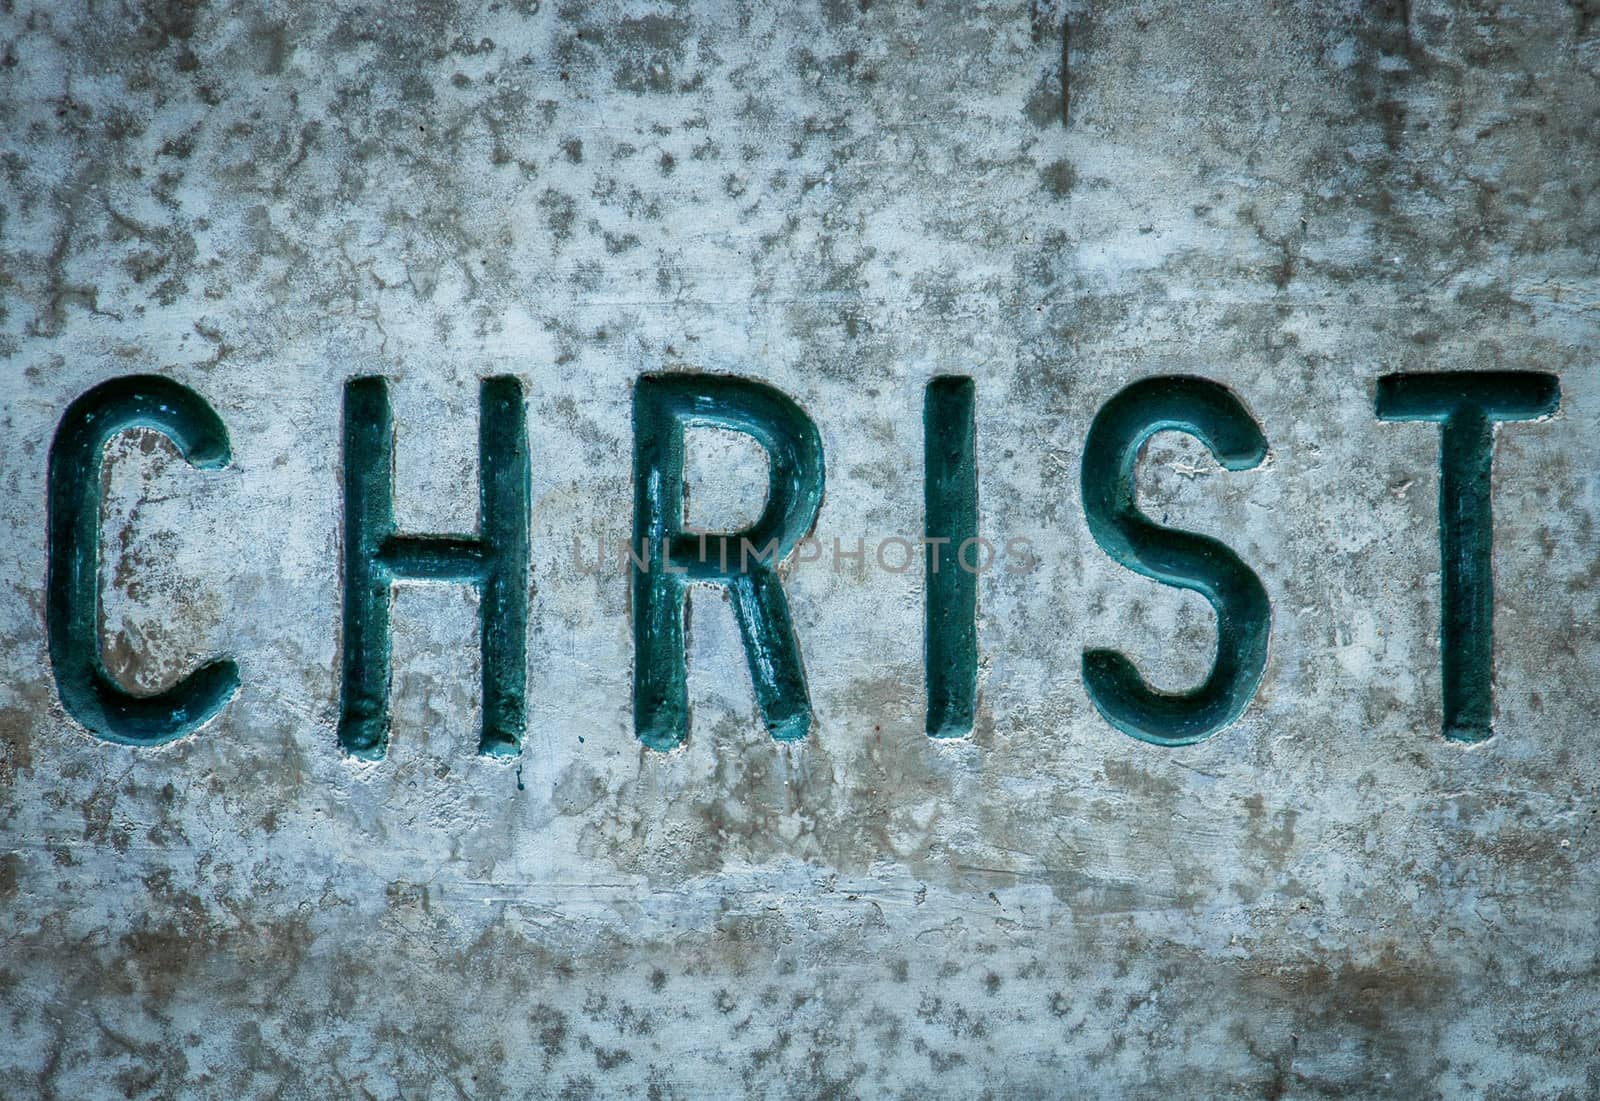 Religious Concept Image Of The Word Christ Chiseled Into Wall